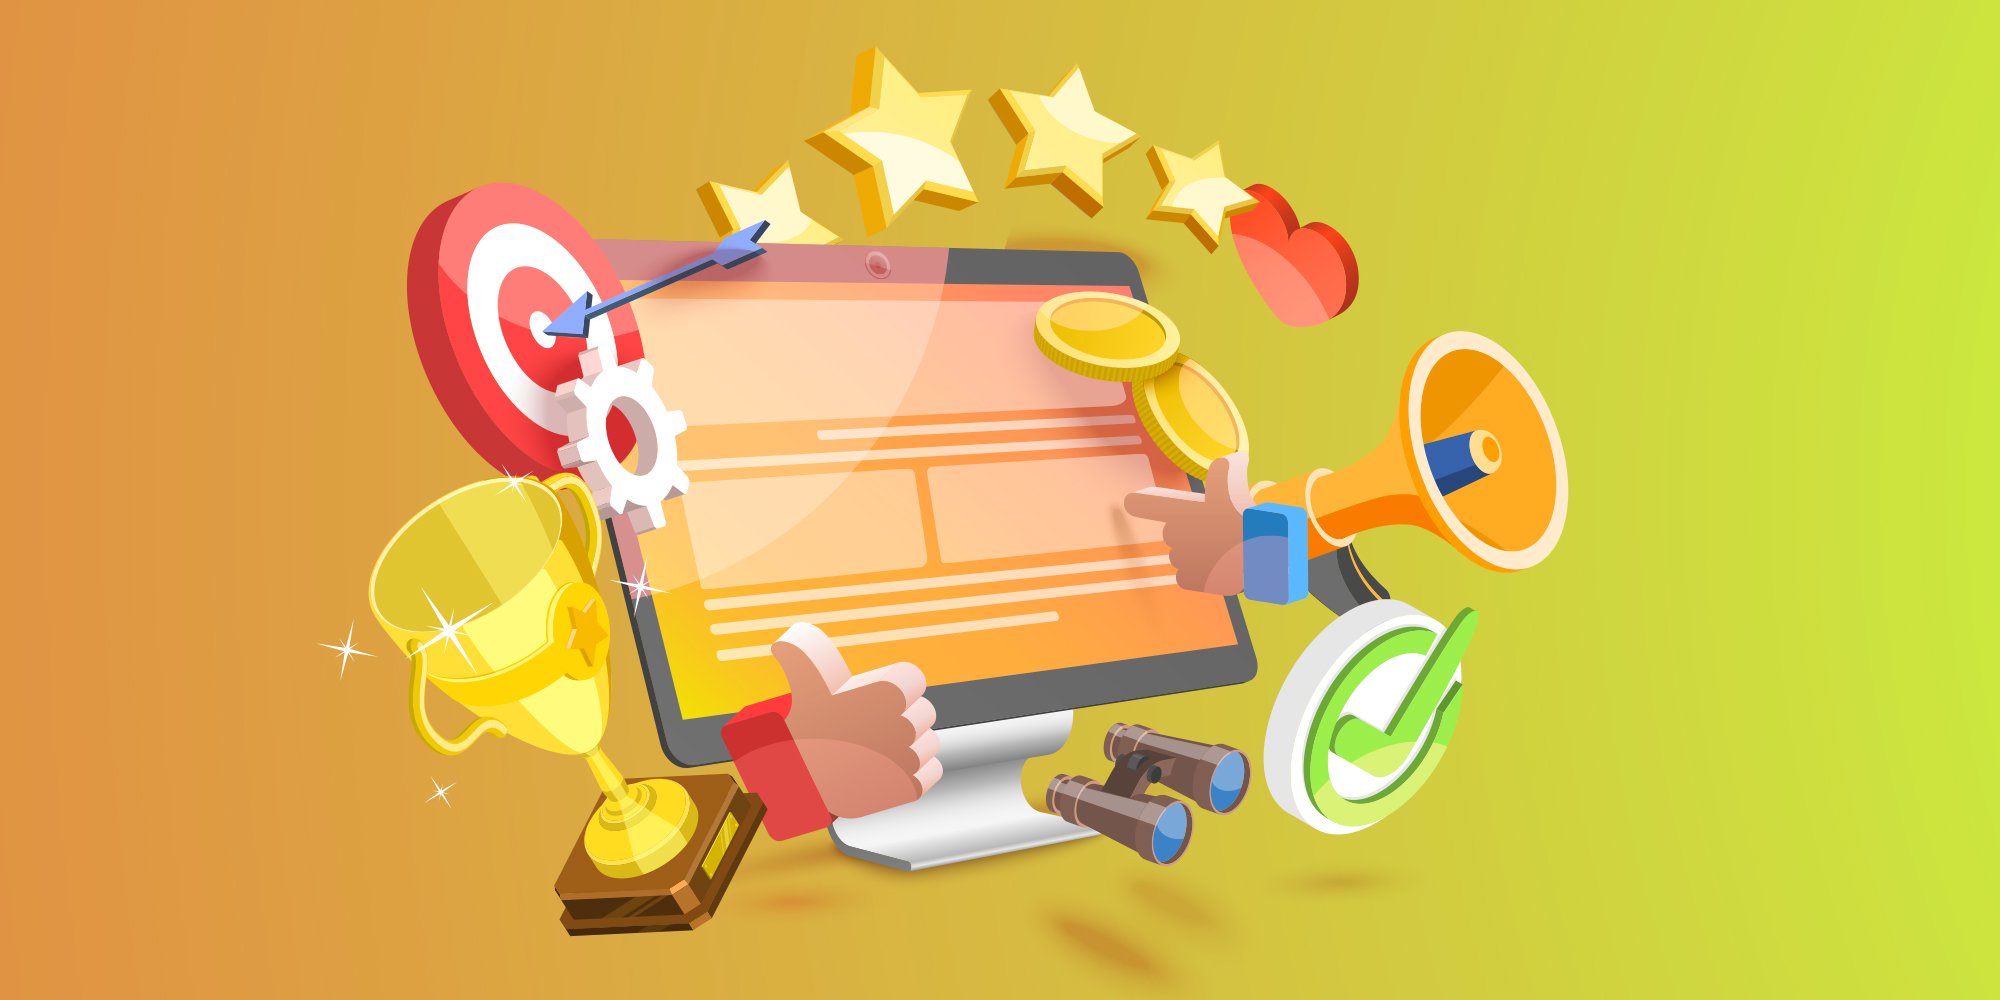 Illustration of mac with design wireframes and icons of stars, target, trophy, thumbs up and coins floating around